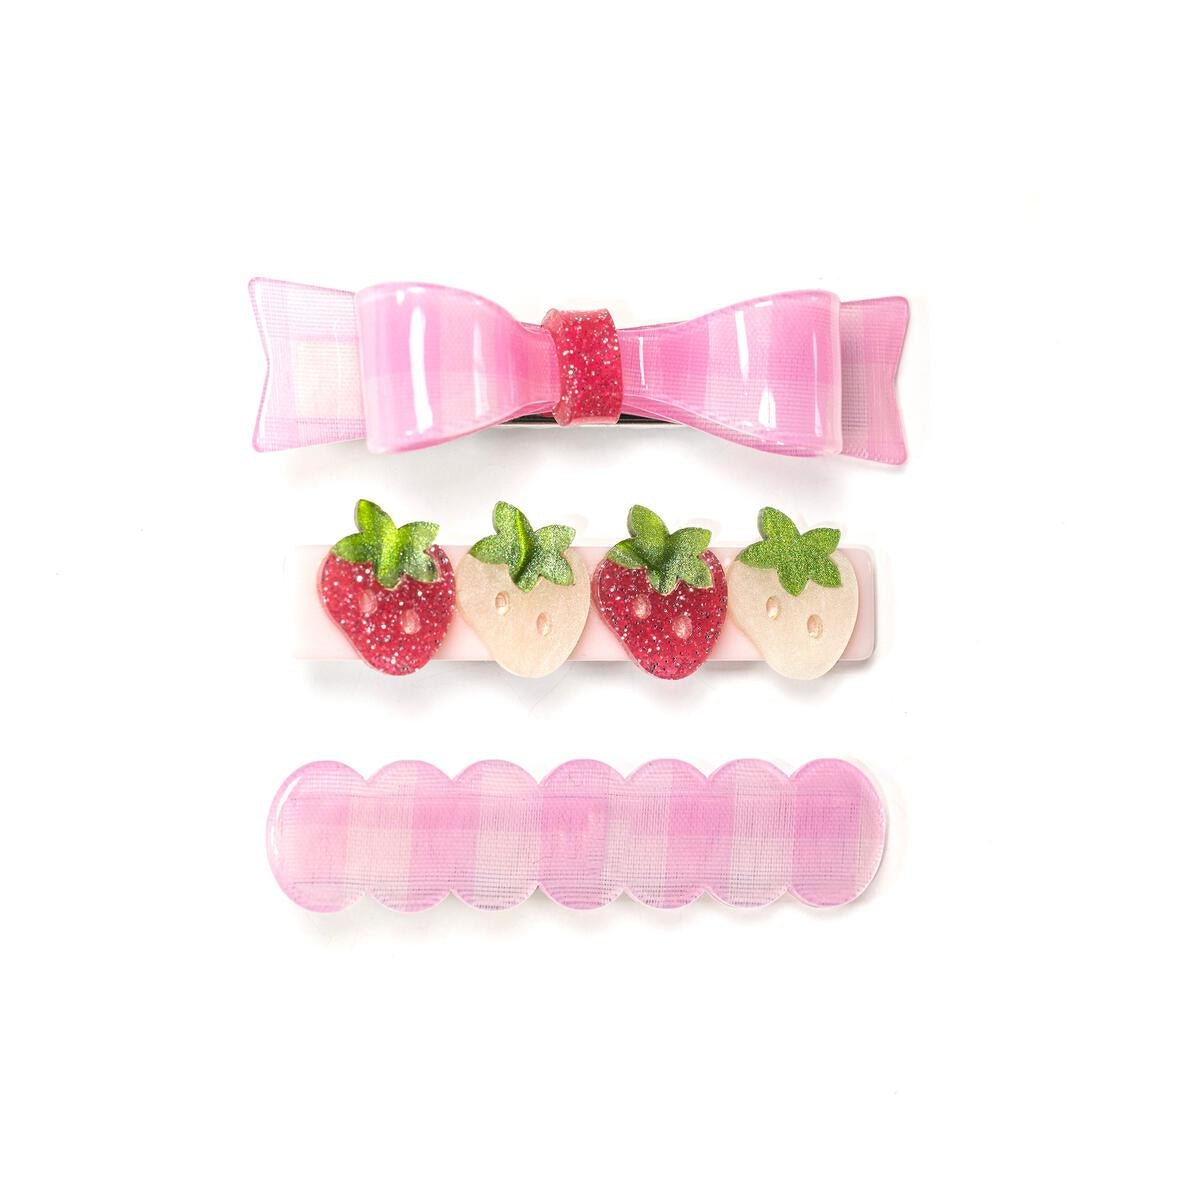 STRAWBERRIES + CHECKERED ALLIGATOR CLIPS (SET OF 3) - LILIES & ROSES